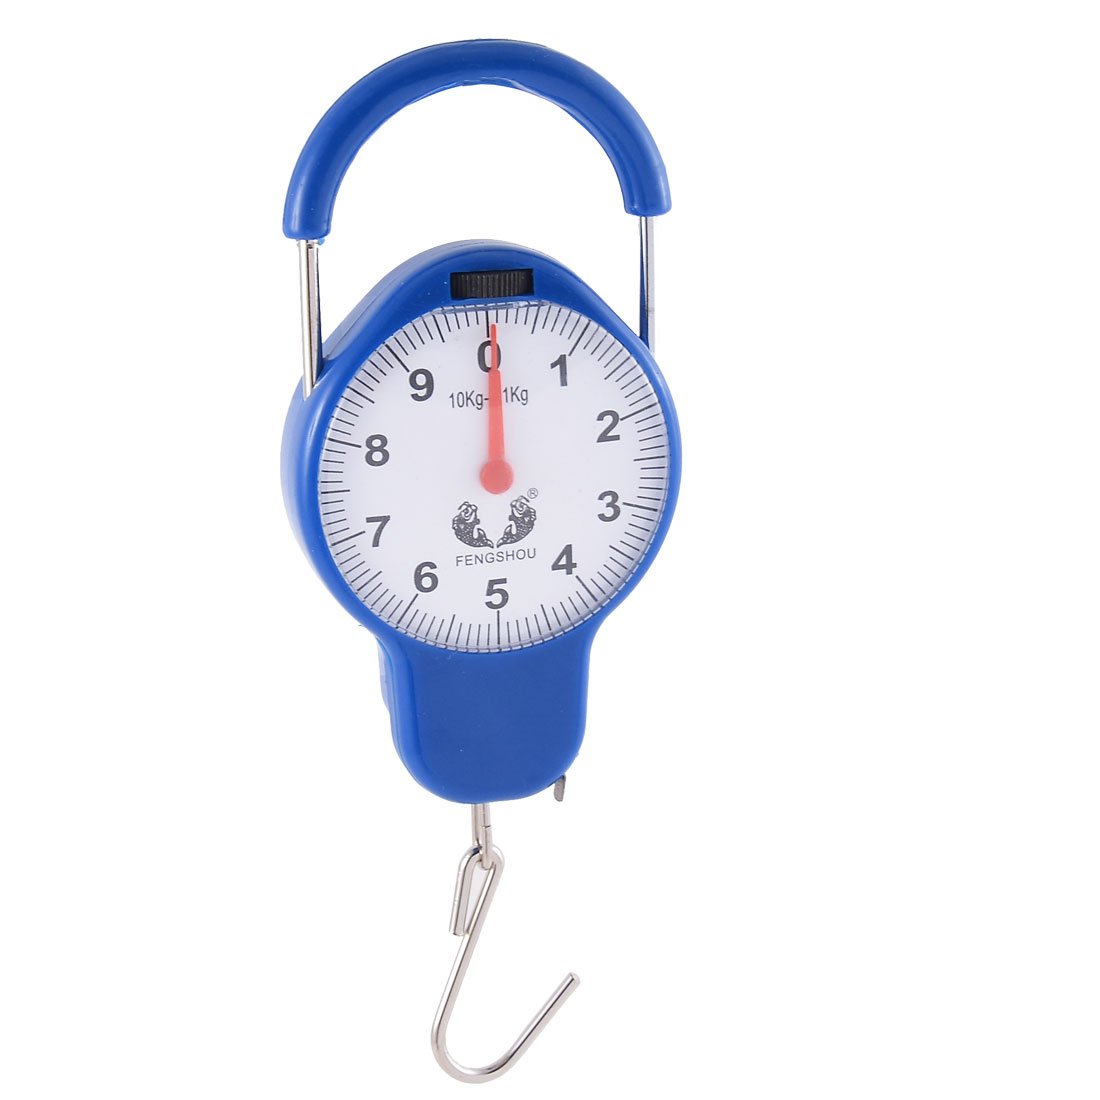 uxcell Plastic Portable Handled Hanging Hook Scale Weight Measure Tool Spring Balance 10kg Blue